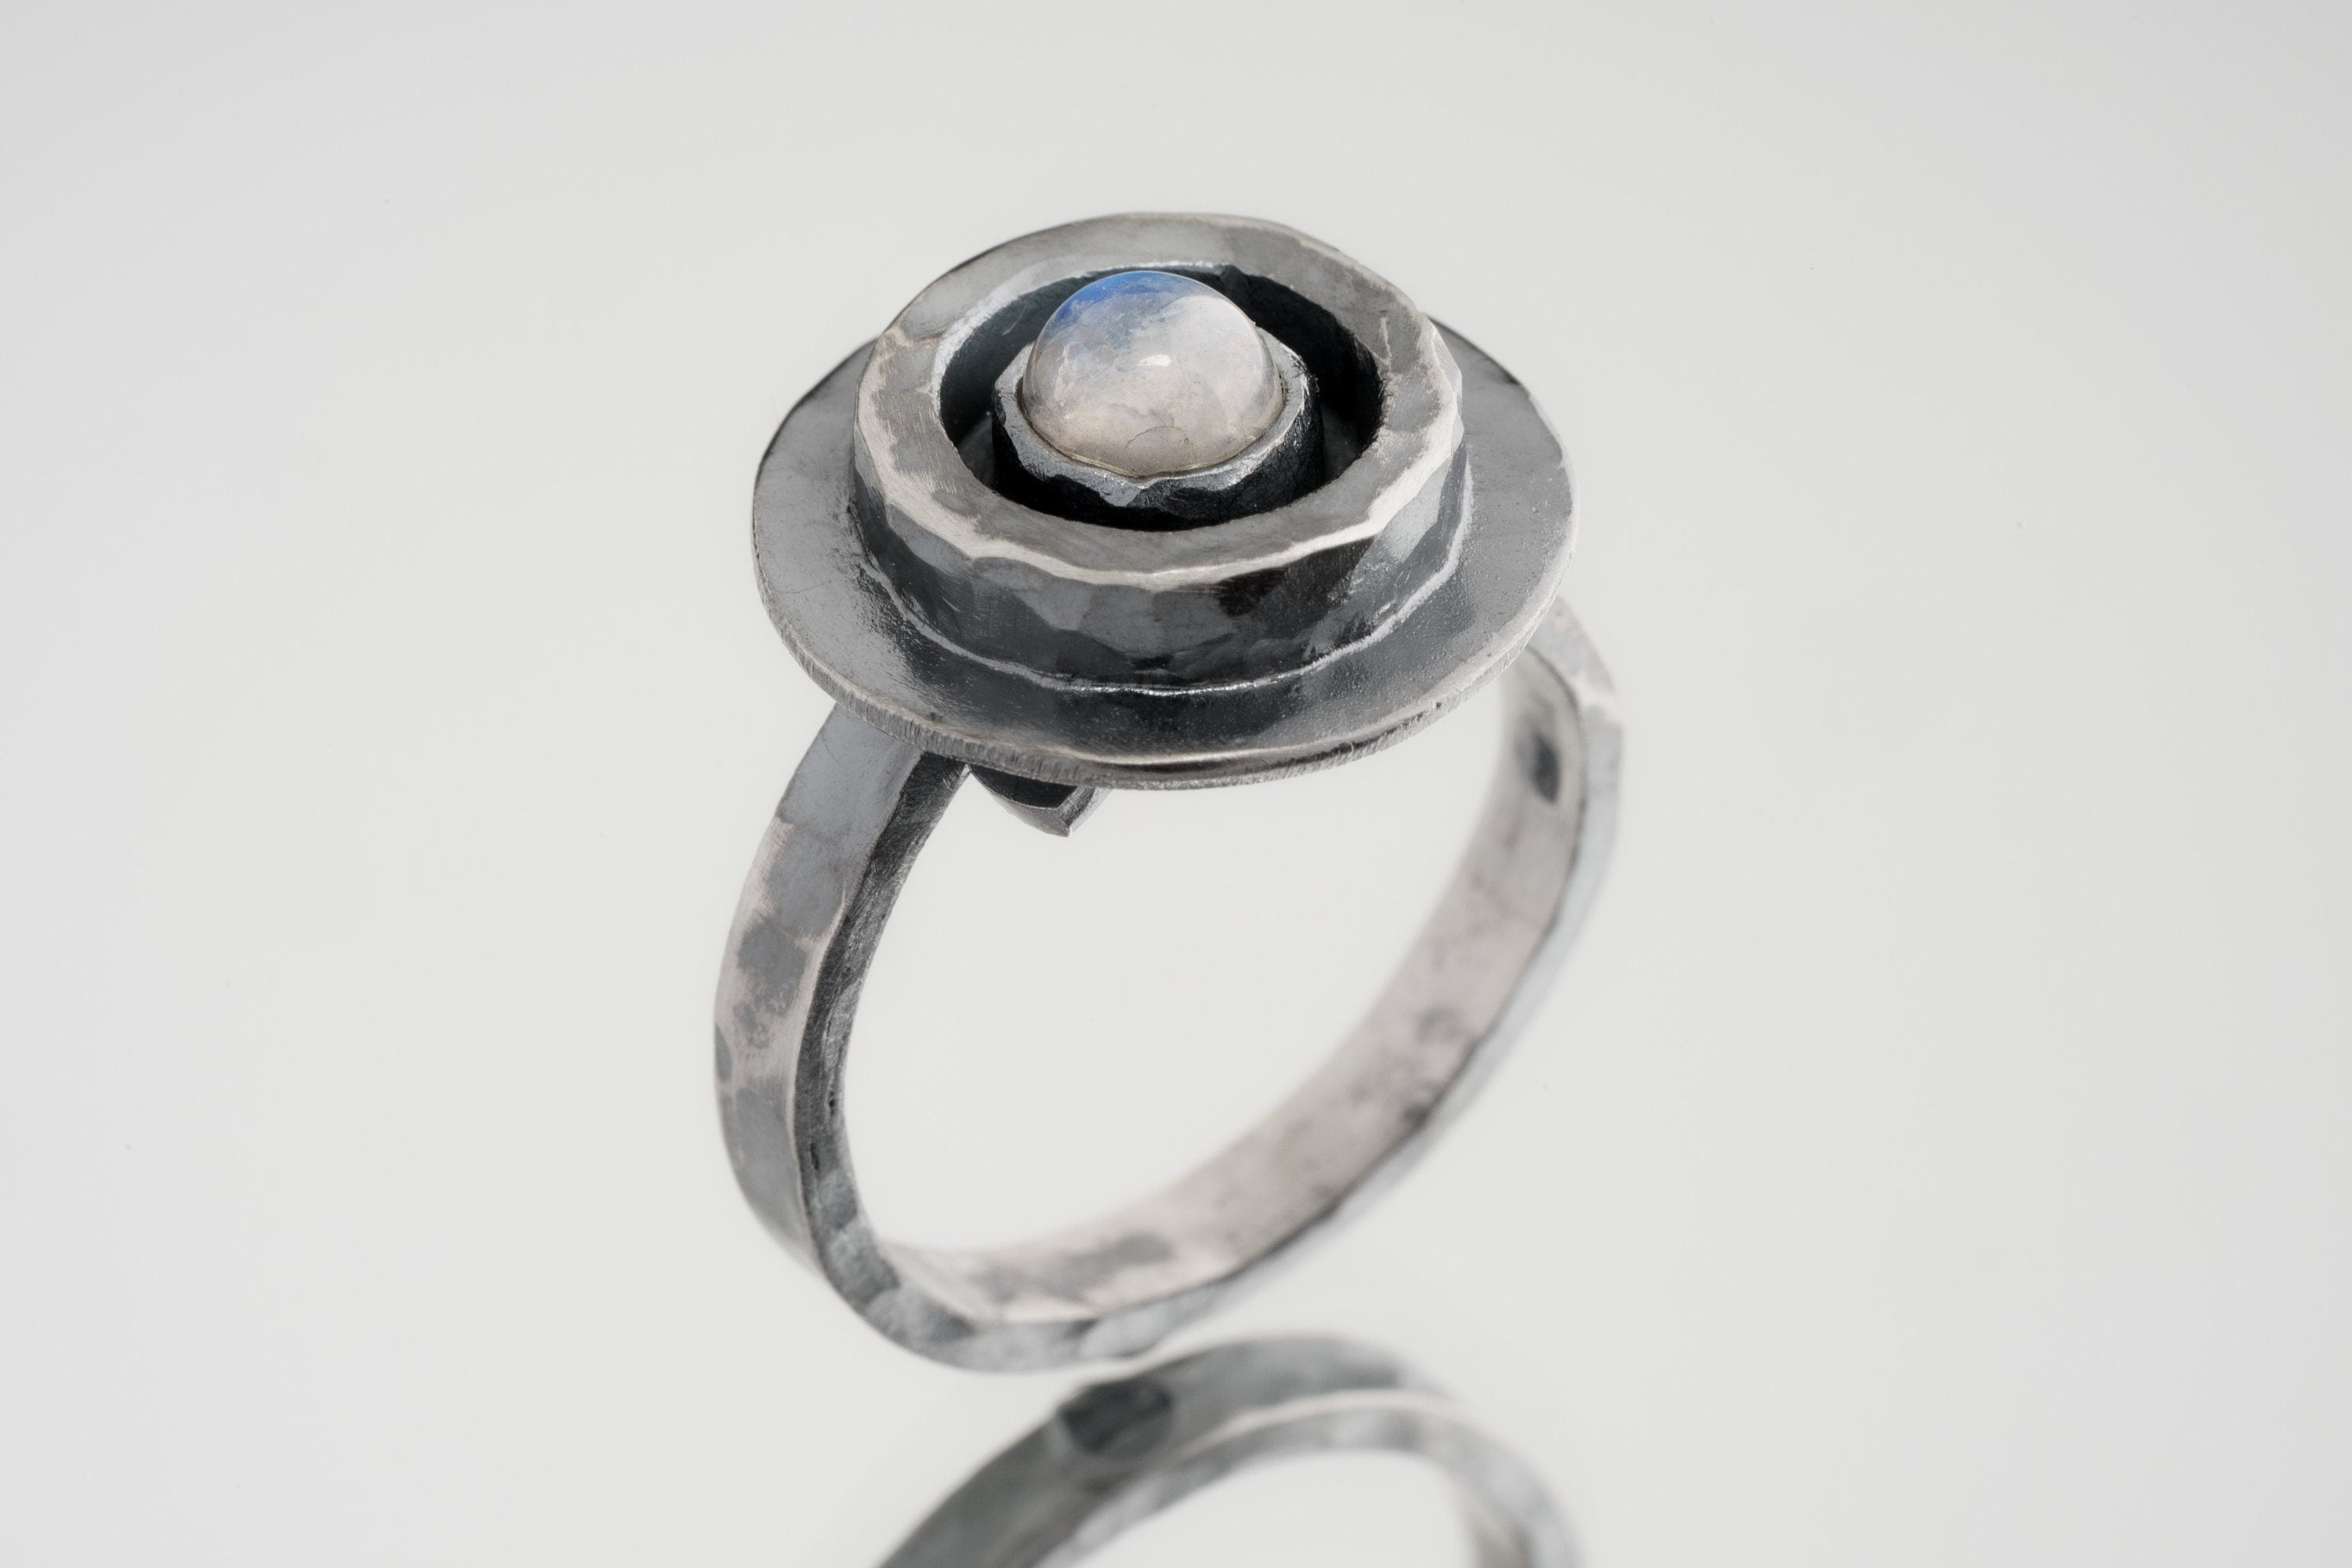 Blue Moonstone Dome Cab - Oxidised Rustick Boho Vibe - 925 Sterling Silver - Heavy Set Adjustable Textured Ring - Size 5-10 US